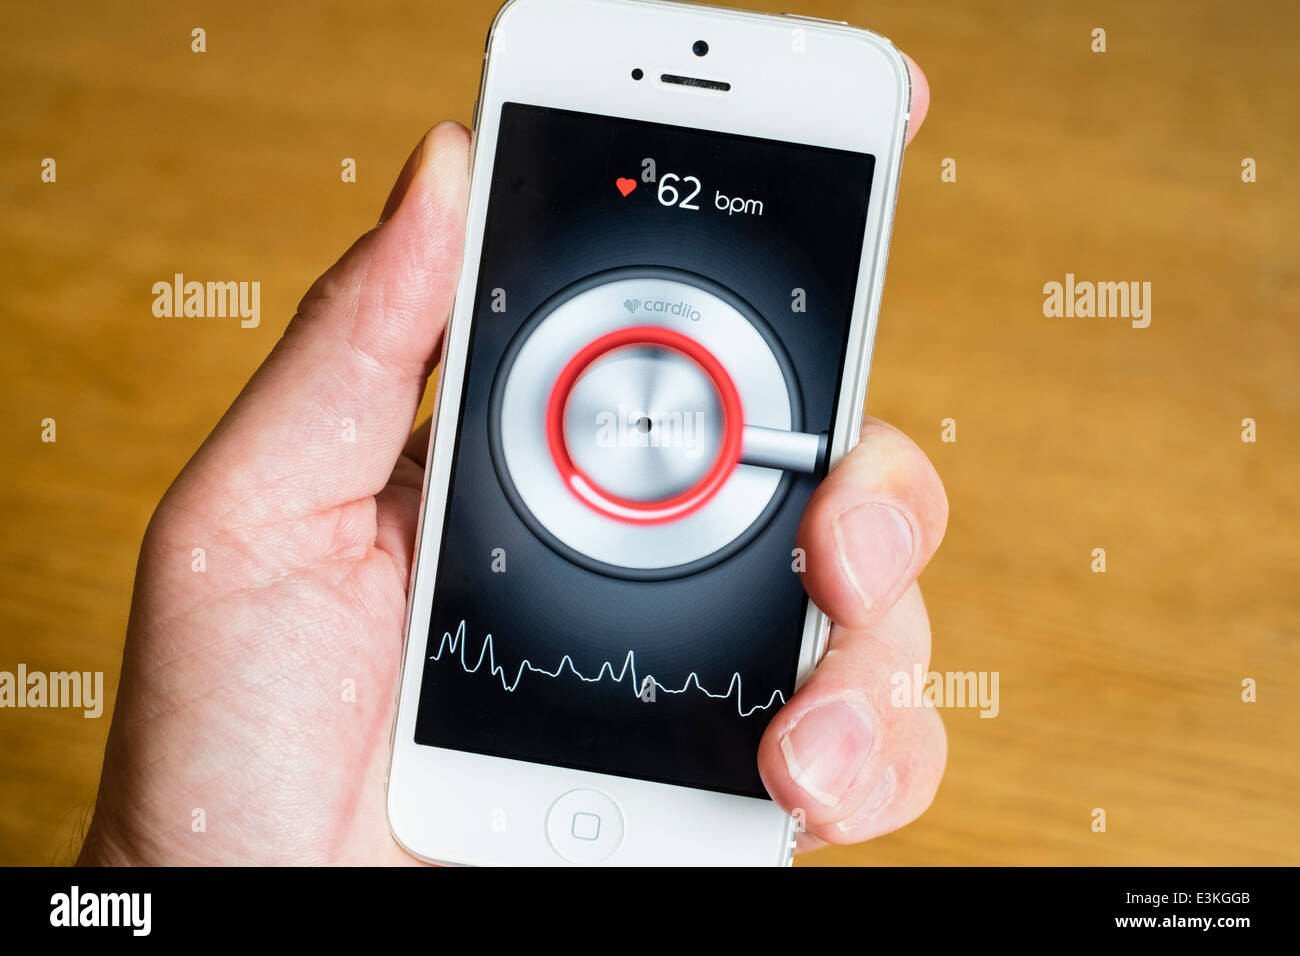 Detail of heart rate monitor health app on a iPhone smart phone Stock Photo